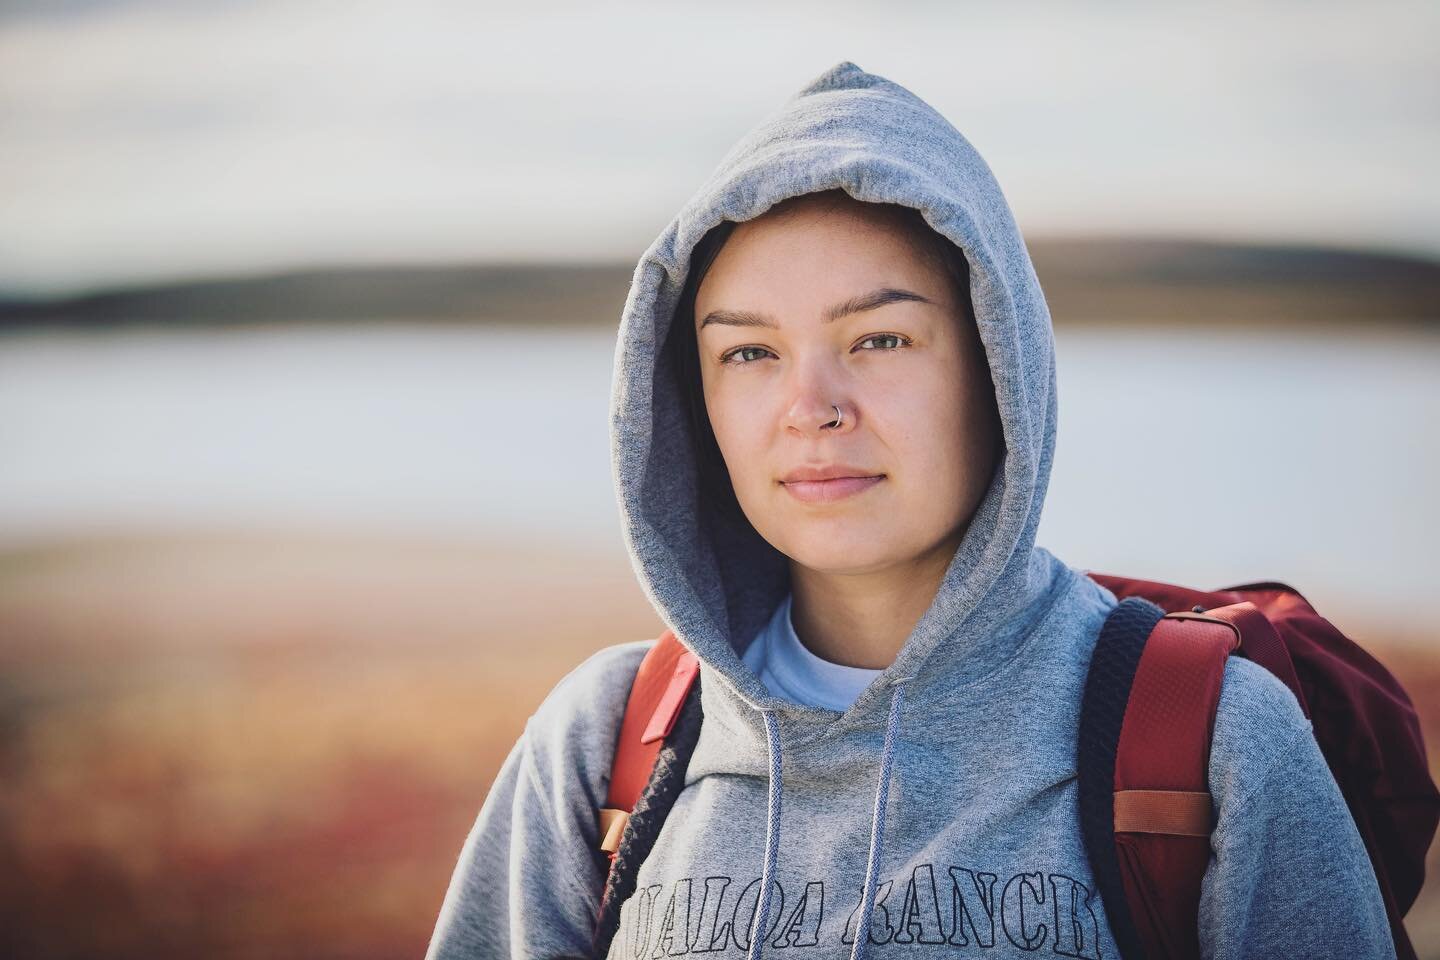 &ldquo;Tłįcho people have been coming here forever and the land has always protected us. Now it&rsquo;s our turn to protect this land.&rdquo; Tłįcho researcher, Tyanna Steinwand of Behchokǫ̀, NWT has walked with the dwindling Bathurst caribou herd